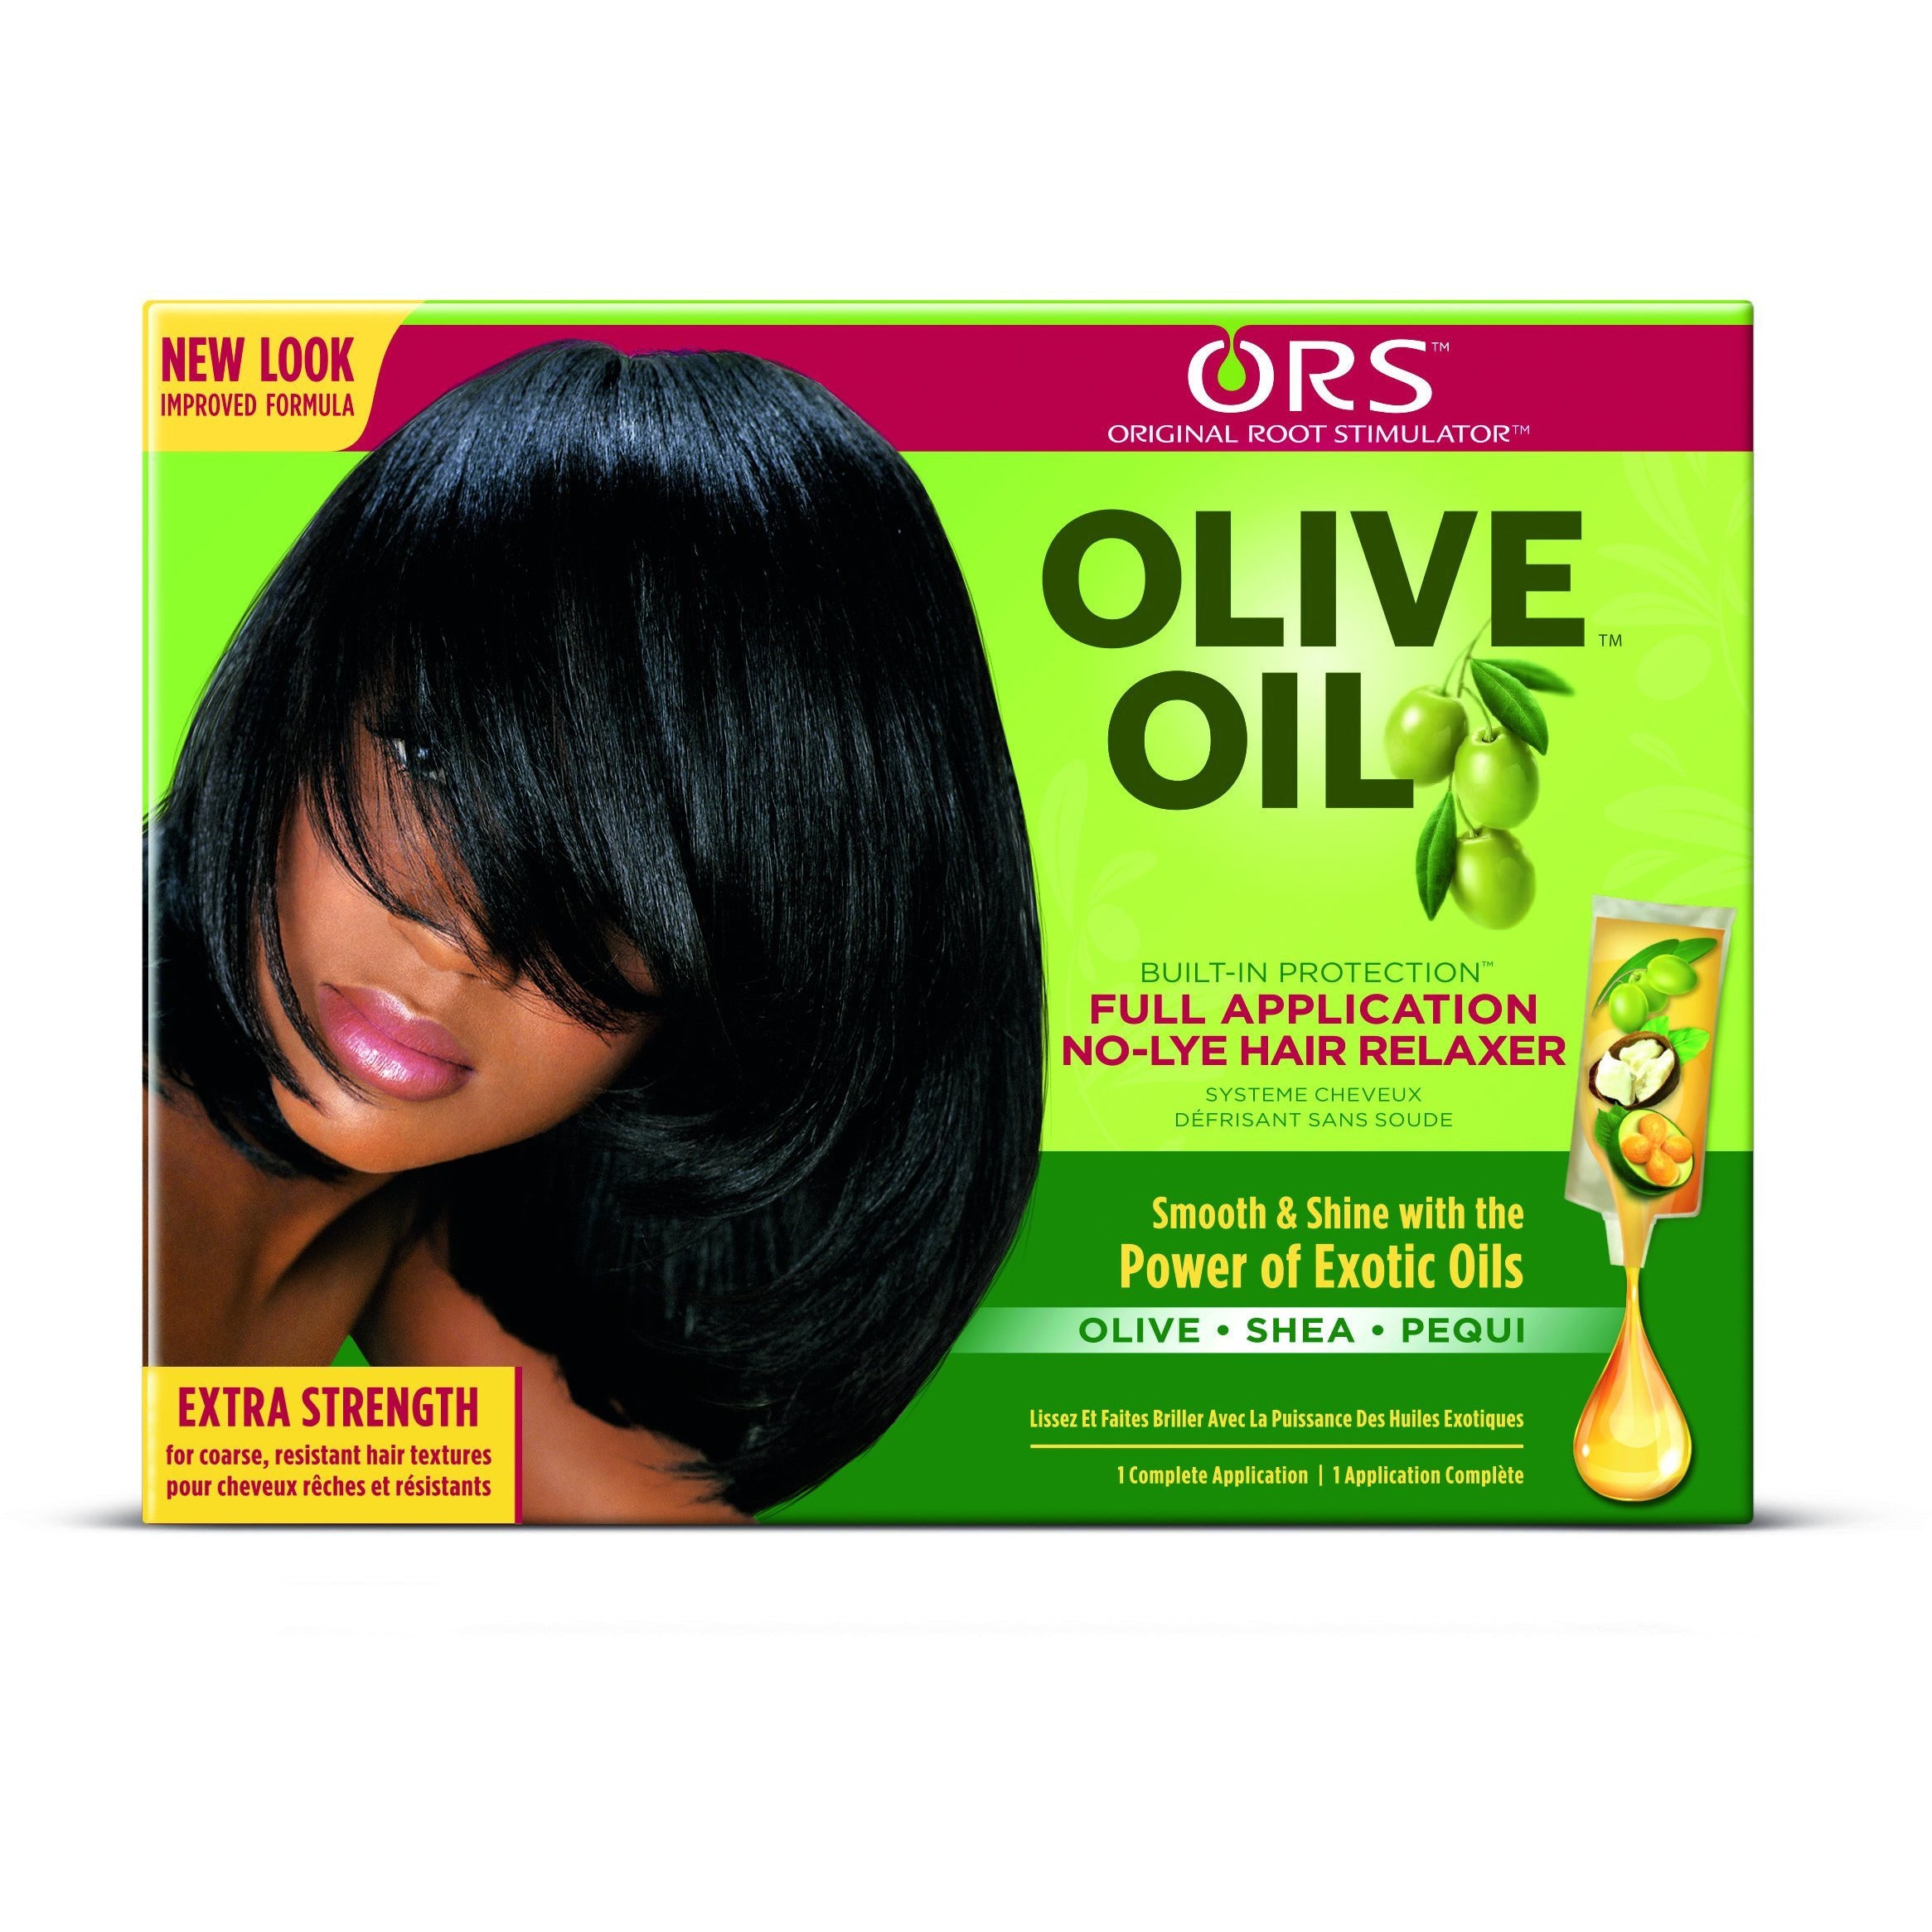 ORS Olive Oil Full Application No-Lye Hair Relaxer, Extra Strength